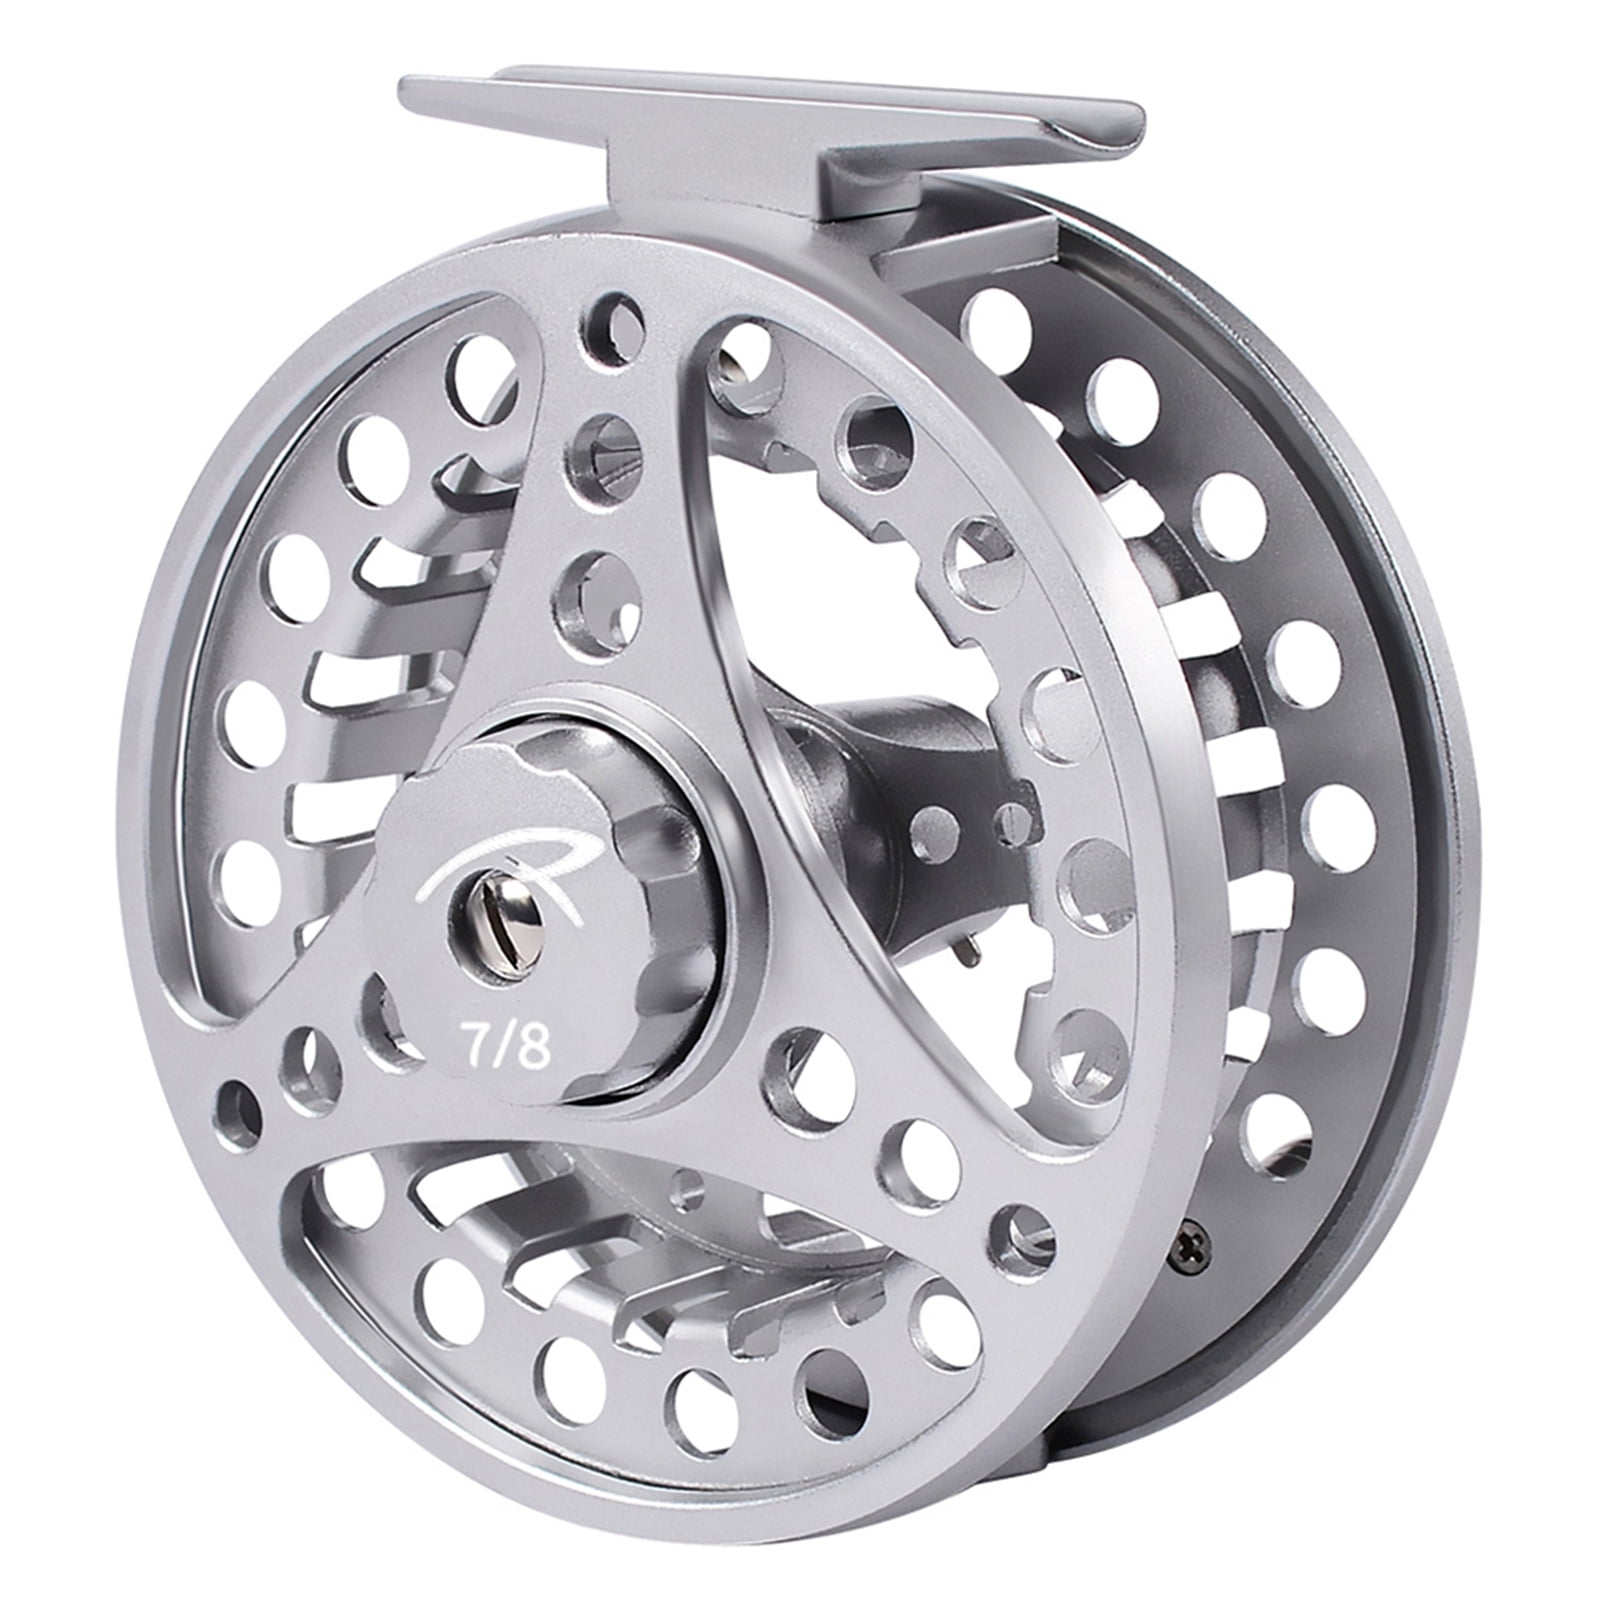 QUARROW BEAR CREEK FULLY LOADED 5/6 FLY REEL WITH BACKING FLY LINE & LEADER 